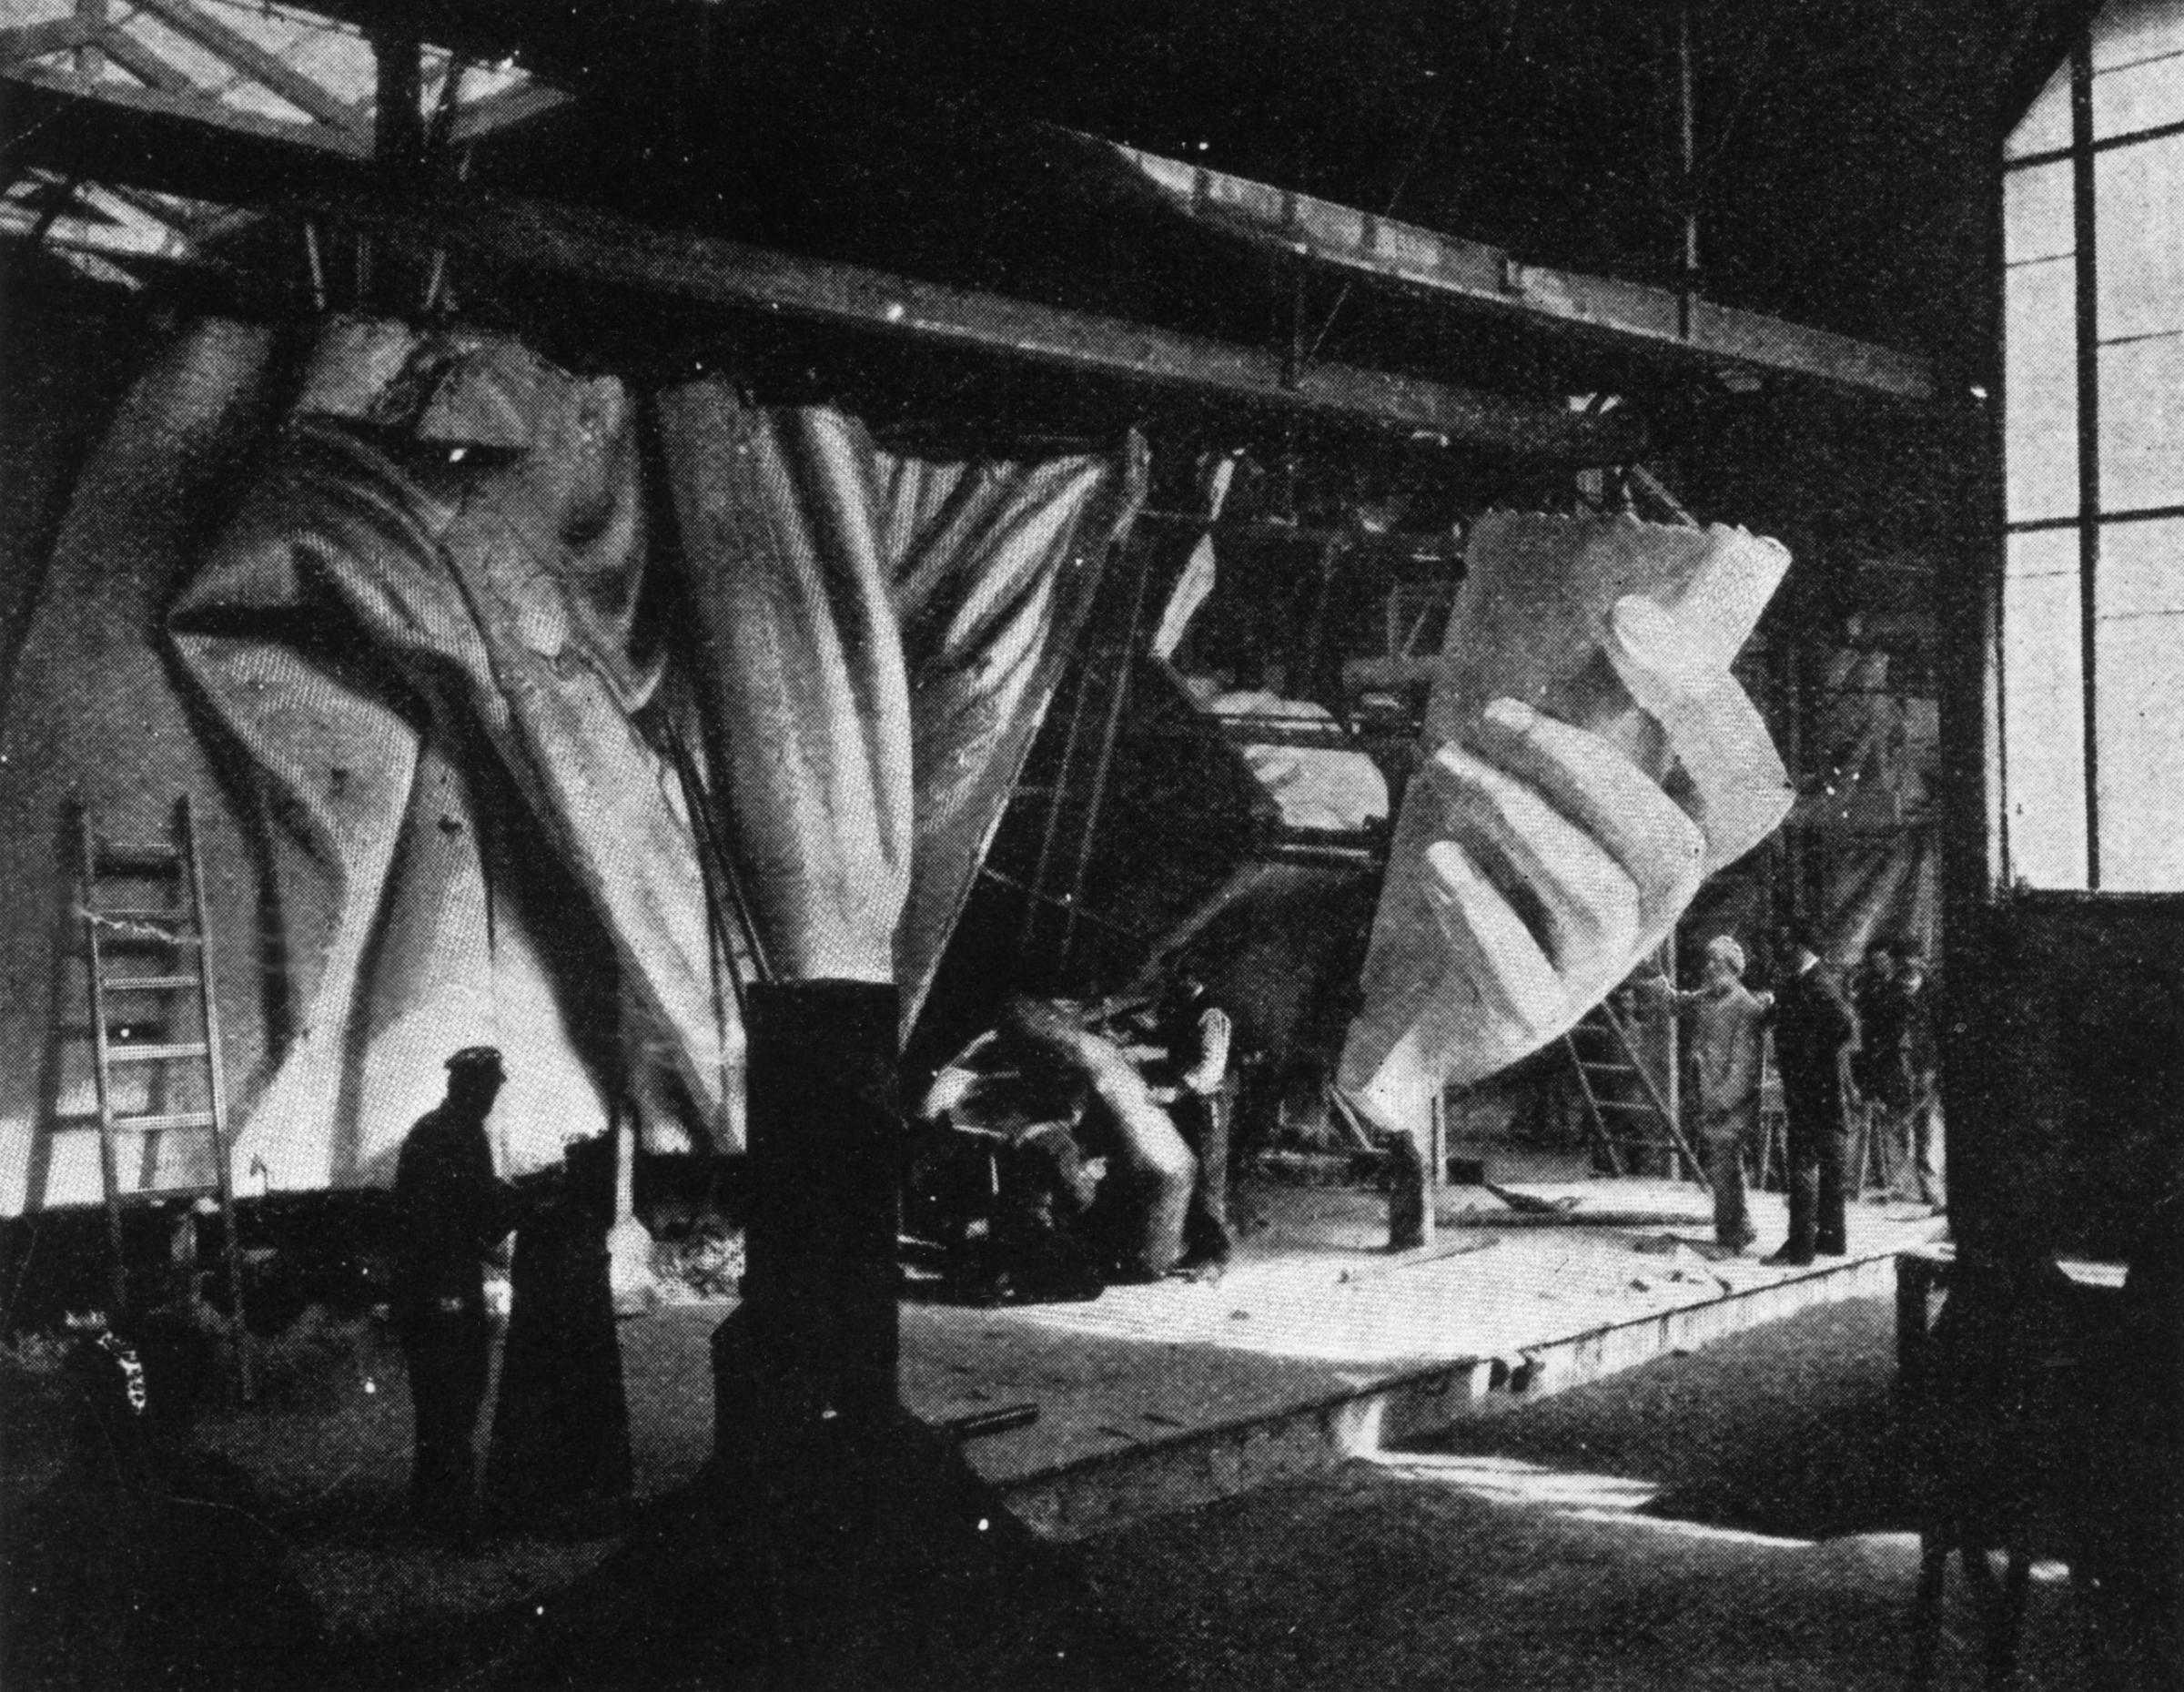 circa 1884: The left hand of the Statue of Liberty under construction. Sixty men have worked for almost ten years on the various parts of the statue, not including its designer Frederic Bartholdi and his assistants.